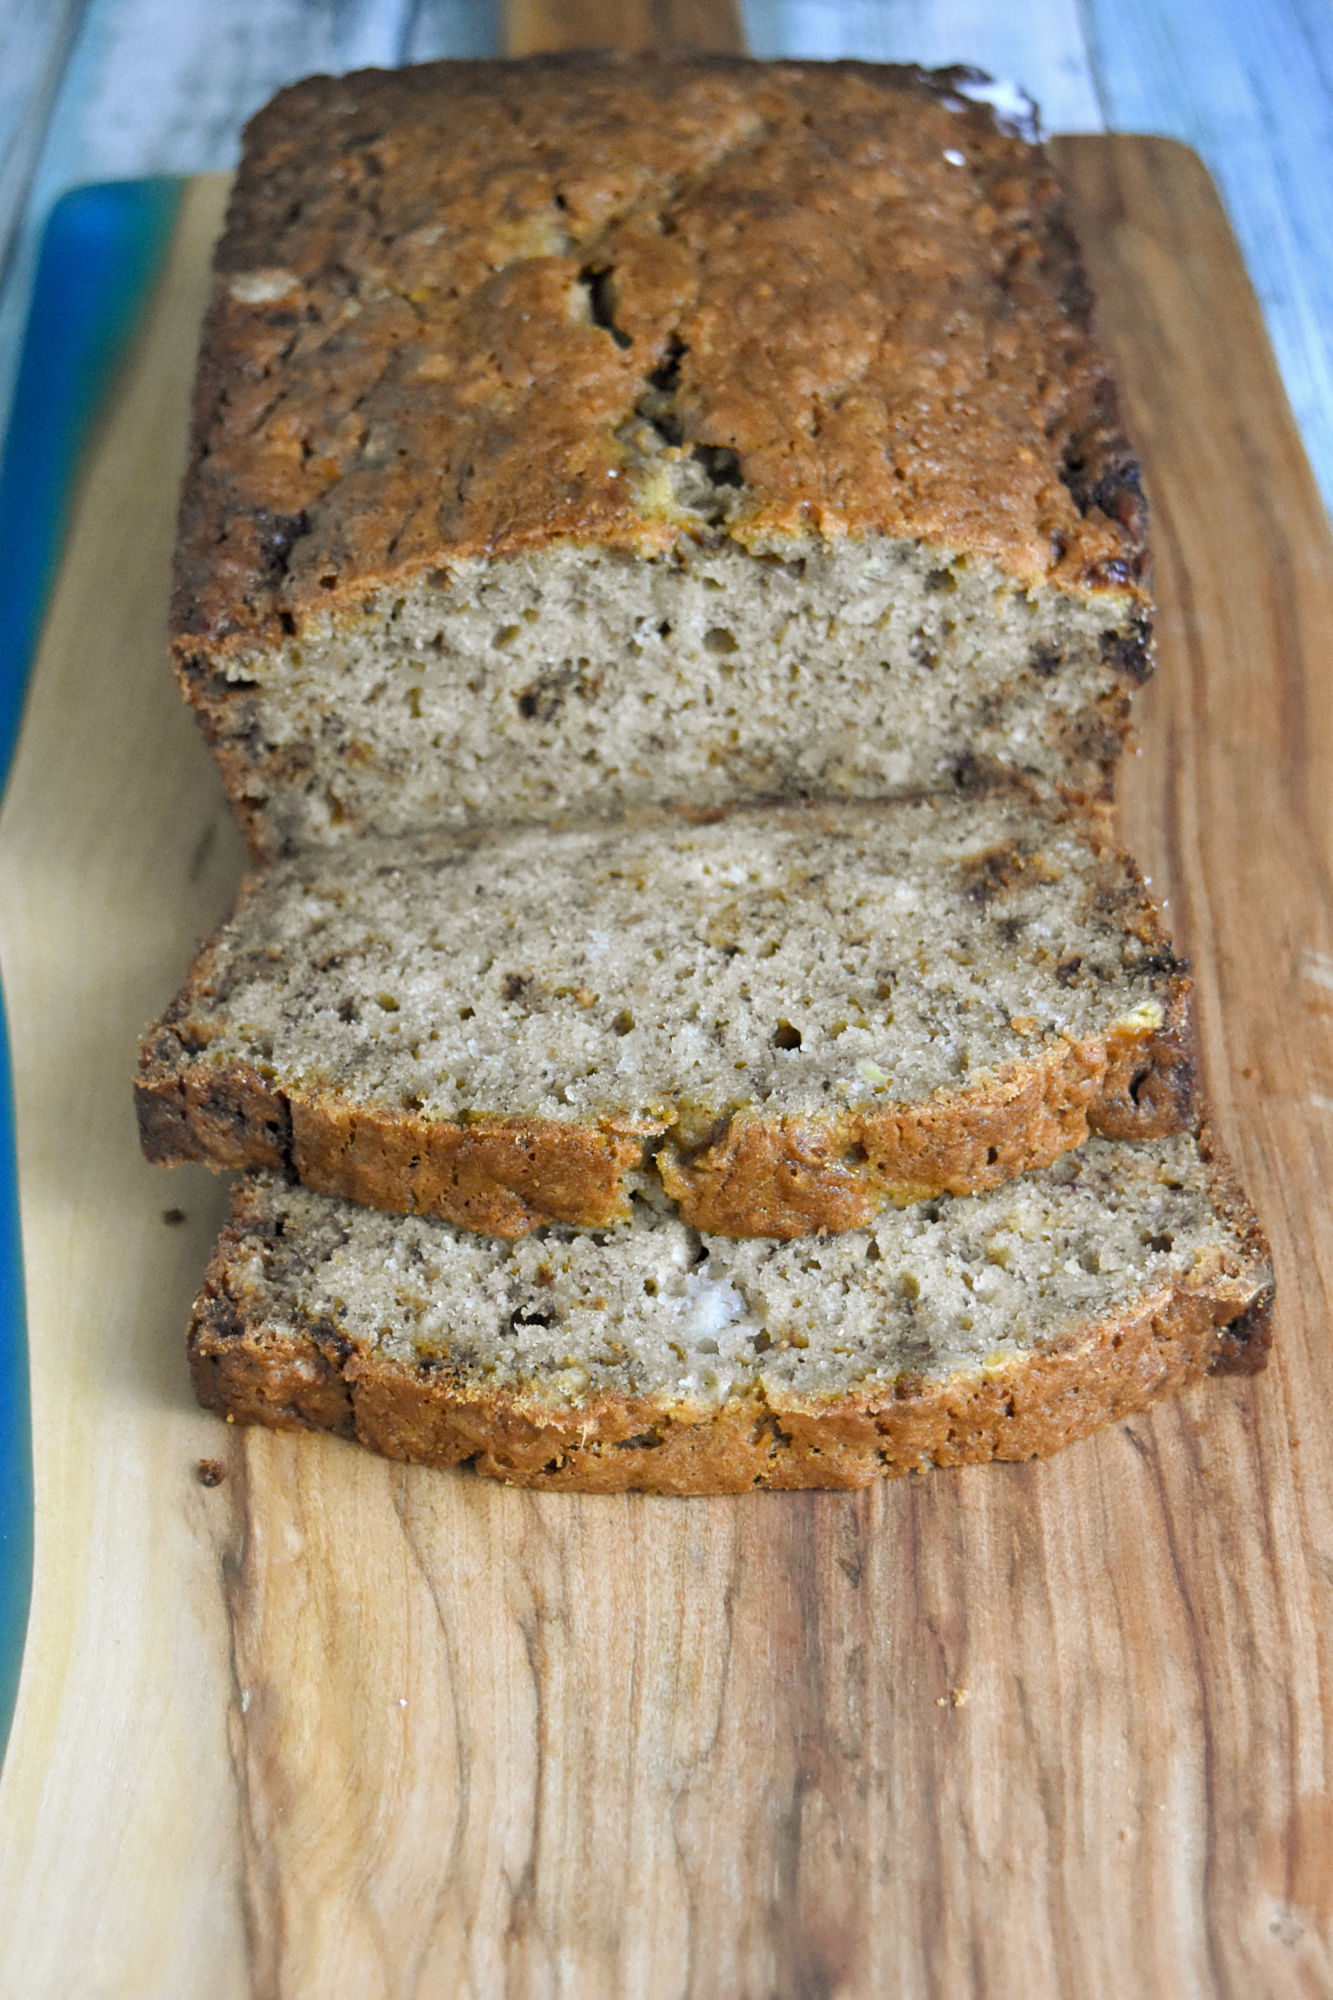 ^Chai Banana Bread^ is moist, delicious, and full of chai spice flavors. It’s buttery, sweet, and irresistible. #OurFamilyTable #quickbread #bananabread #chaispice 